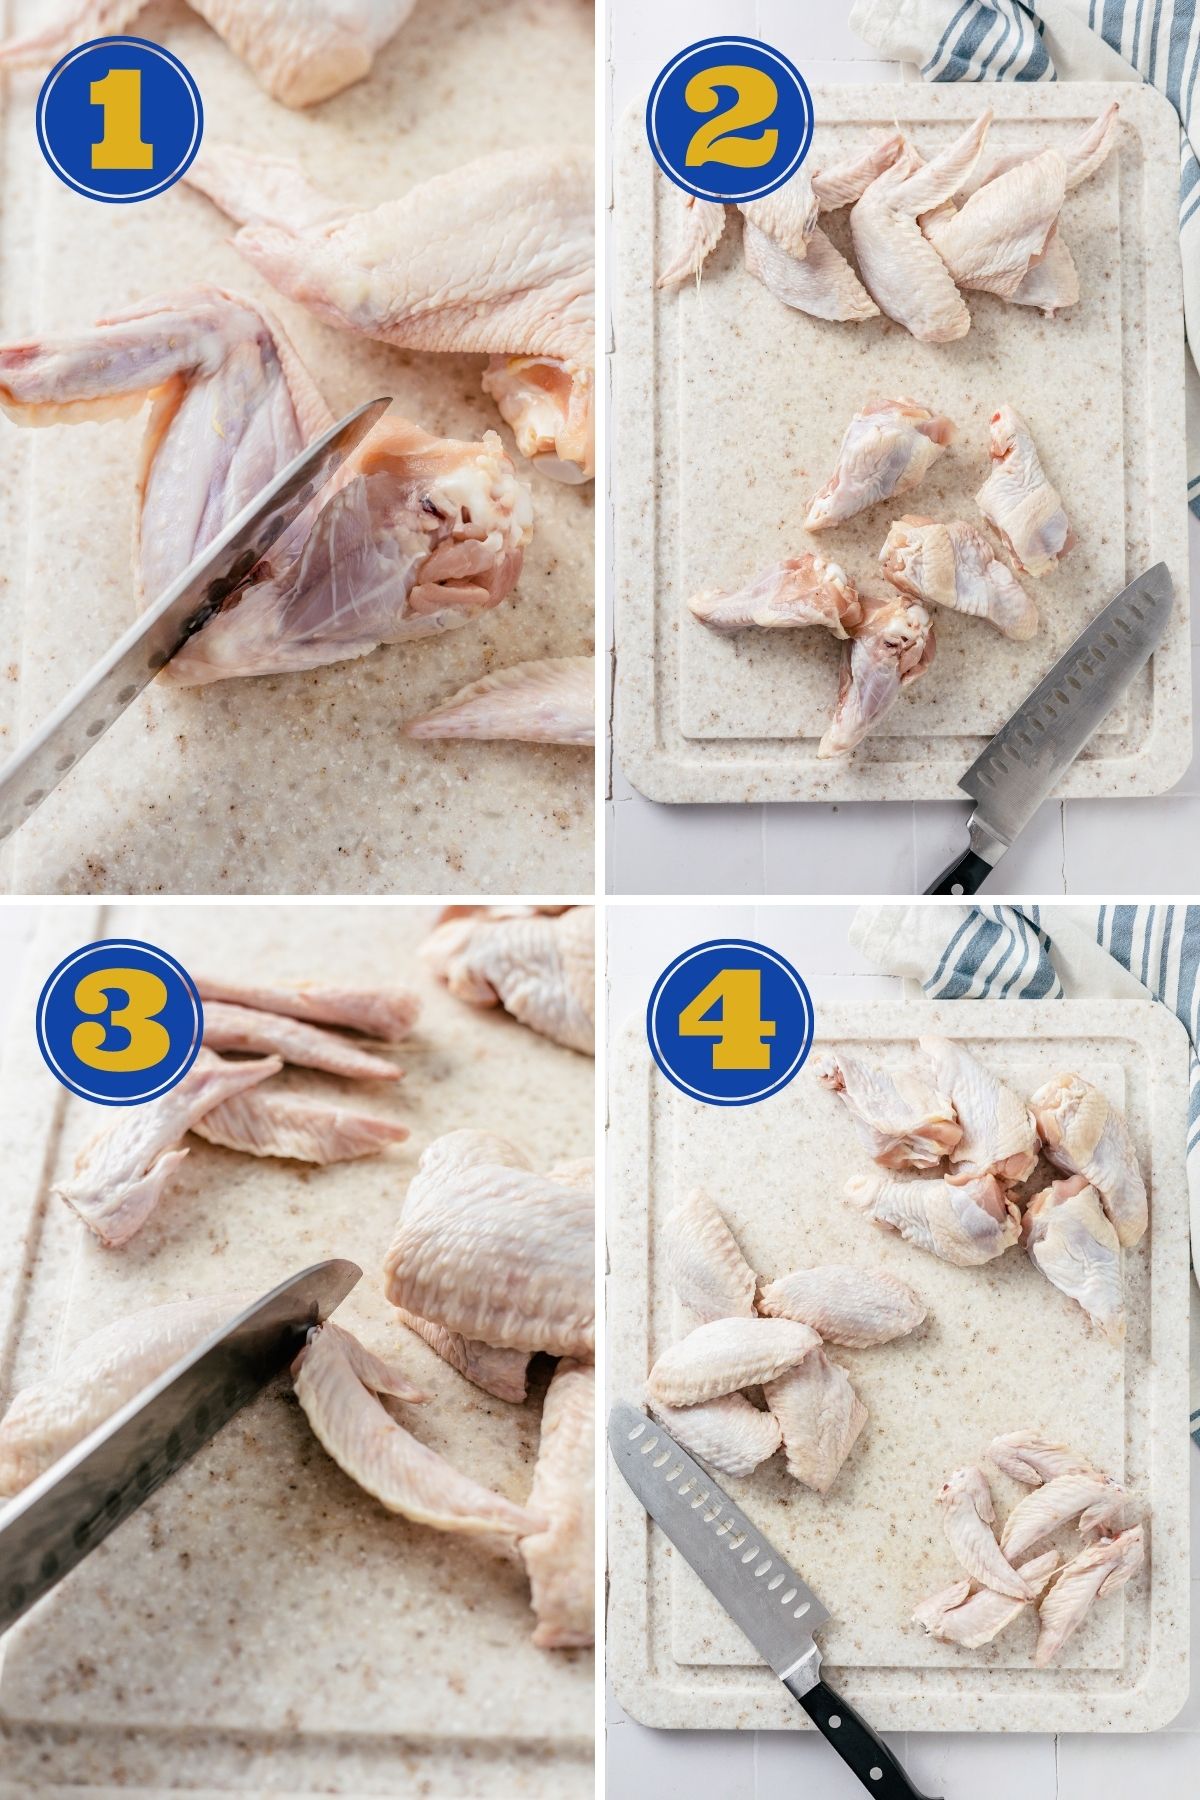 step-by-step instructions for how to cut chicken wings into parts with a knife or kitchen shears